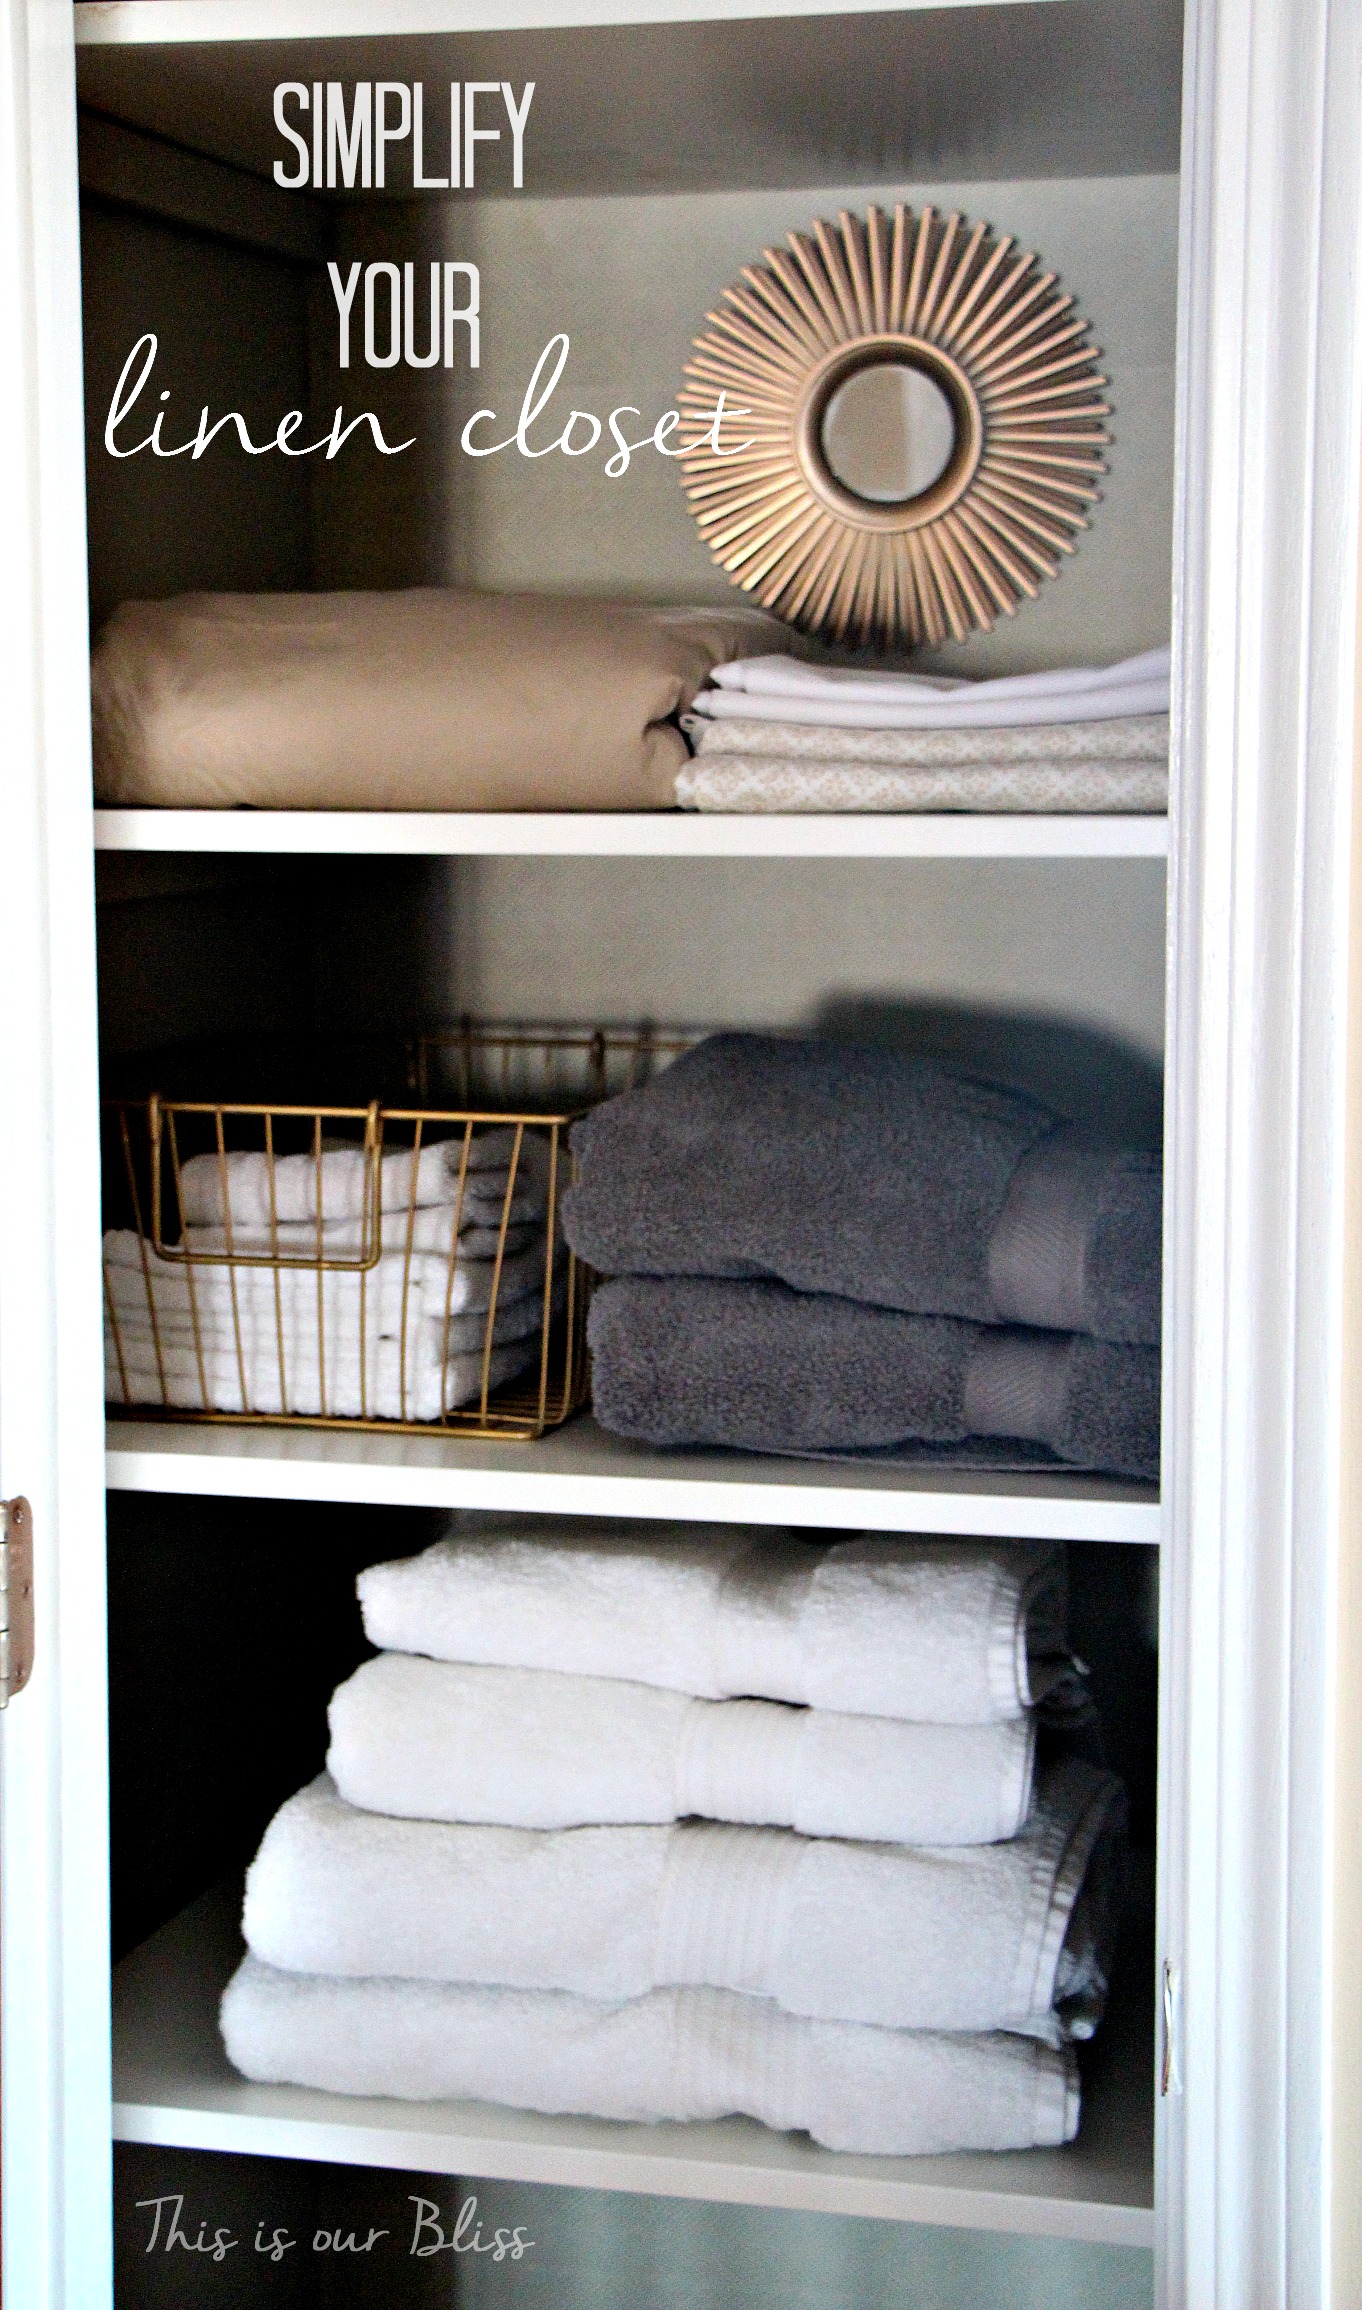 https://thisisourbliss.files.wordpress.com/2015/02/simplify-your-linen-closet-declutter-and-organize-linen-closet-makeover-this-is-our-bliss.jpg